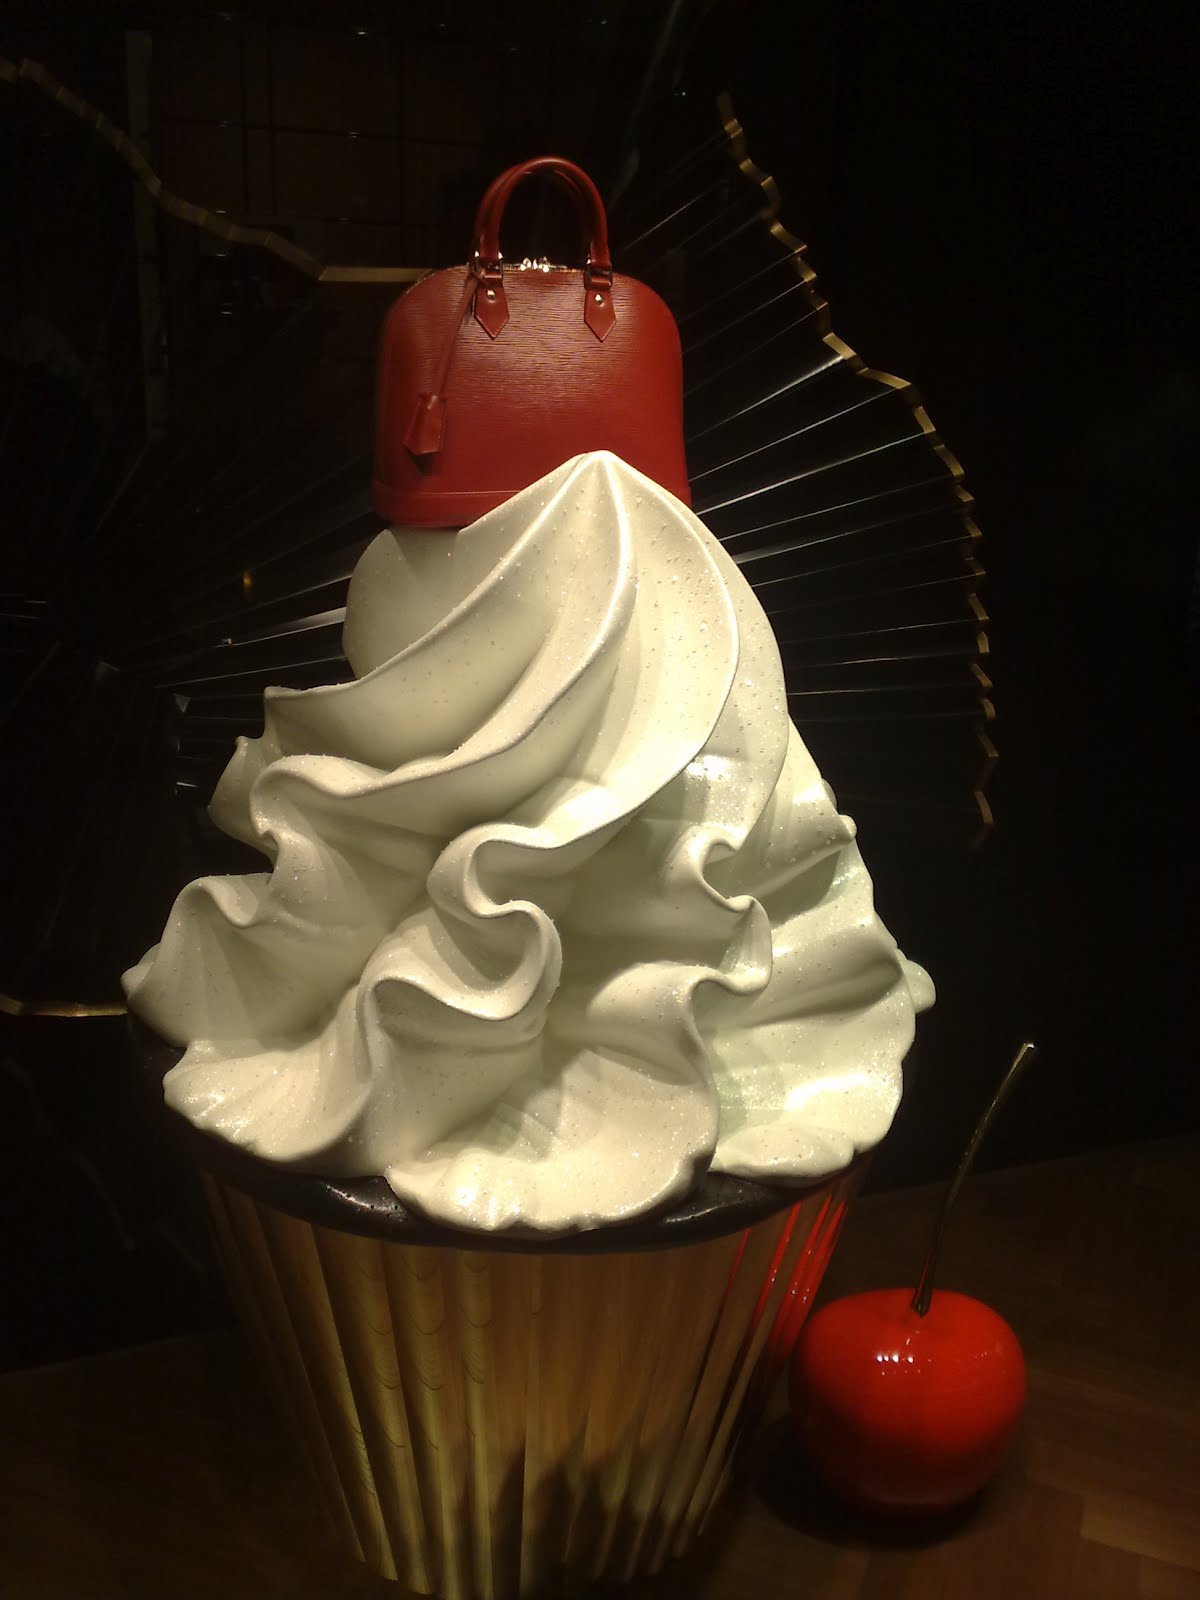 displayhunter: Louis Vuitton: Toppings on cup cake